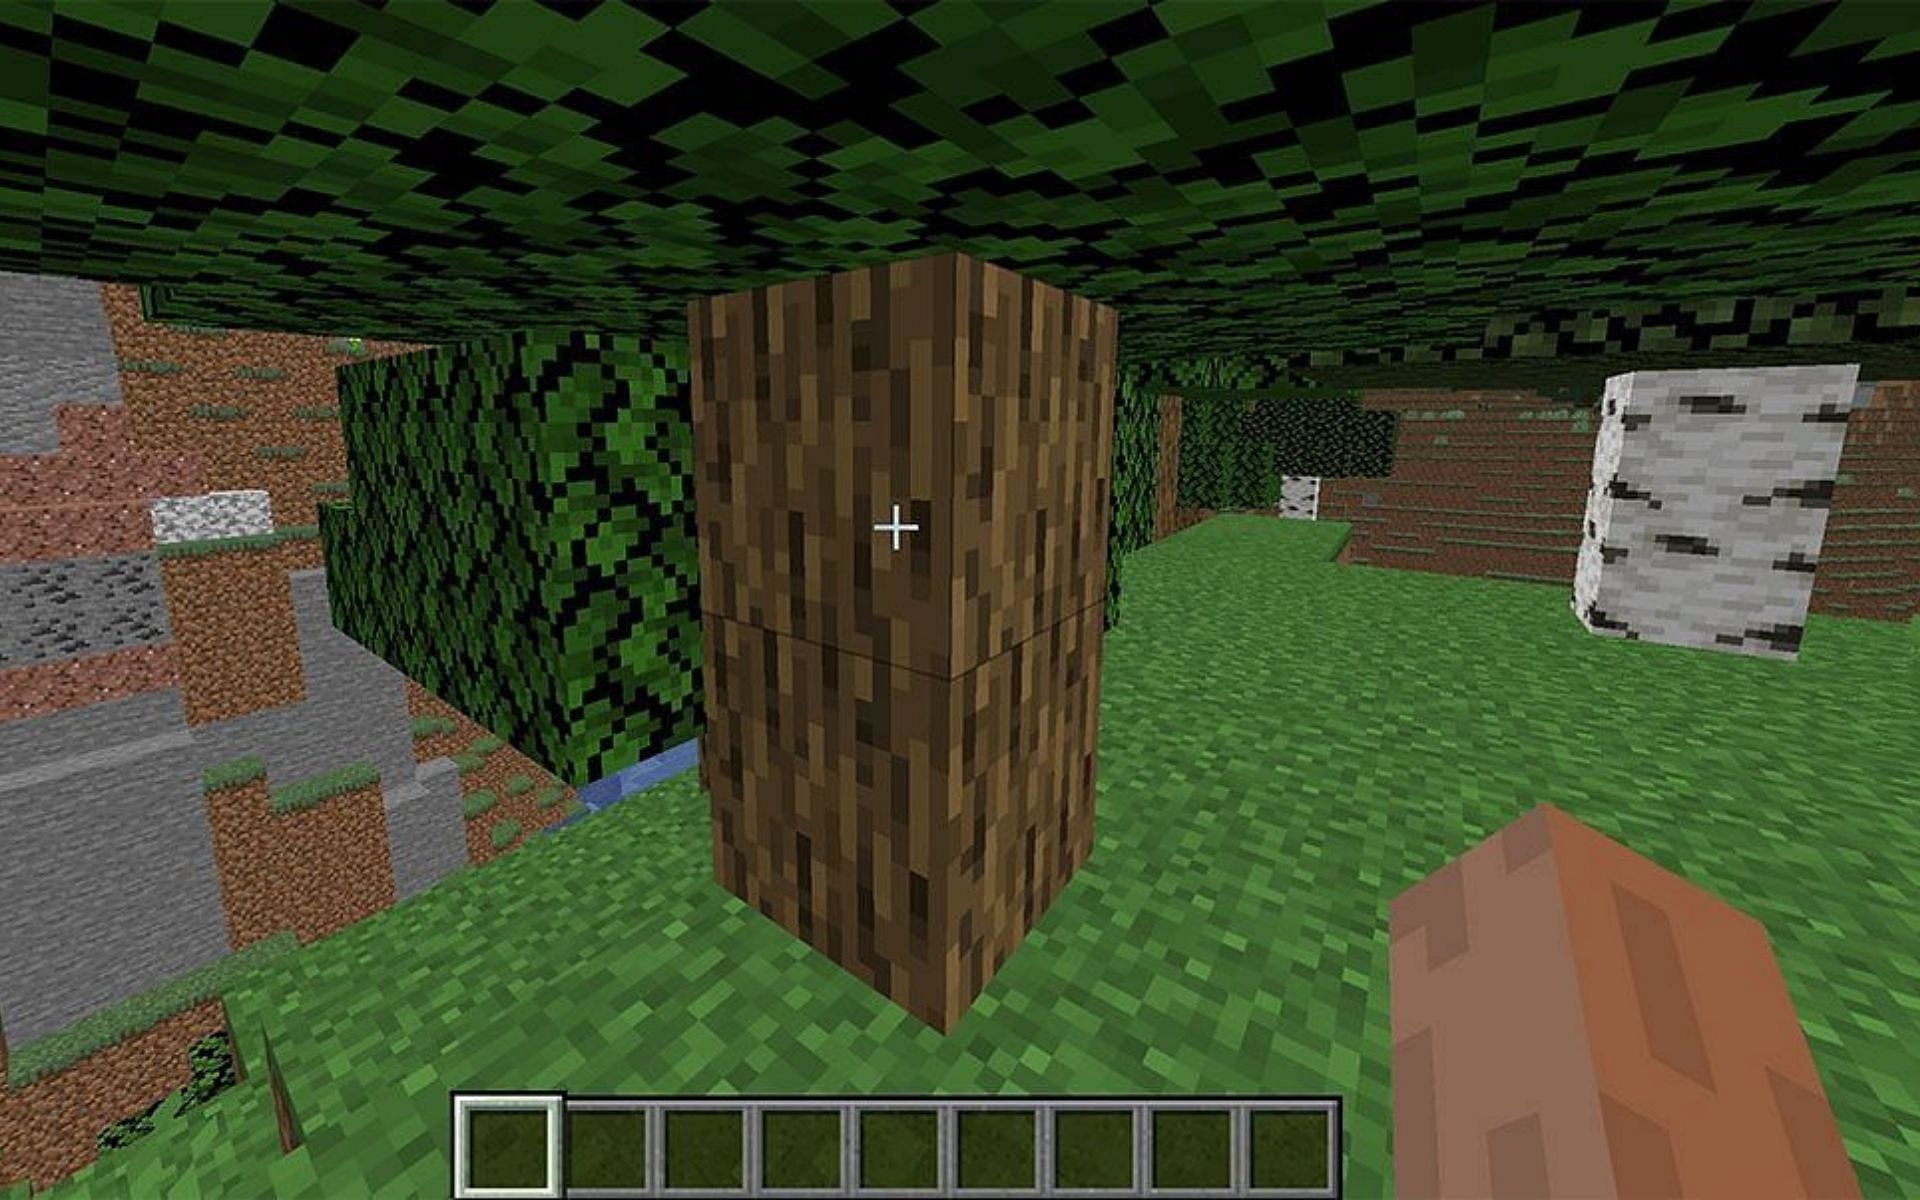 When the game begins, players likely need to punch some trees (Image via Mojang)